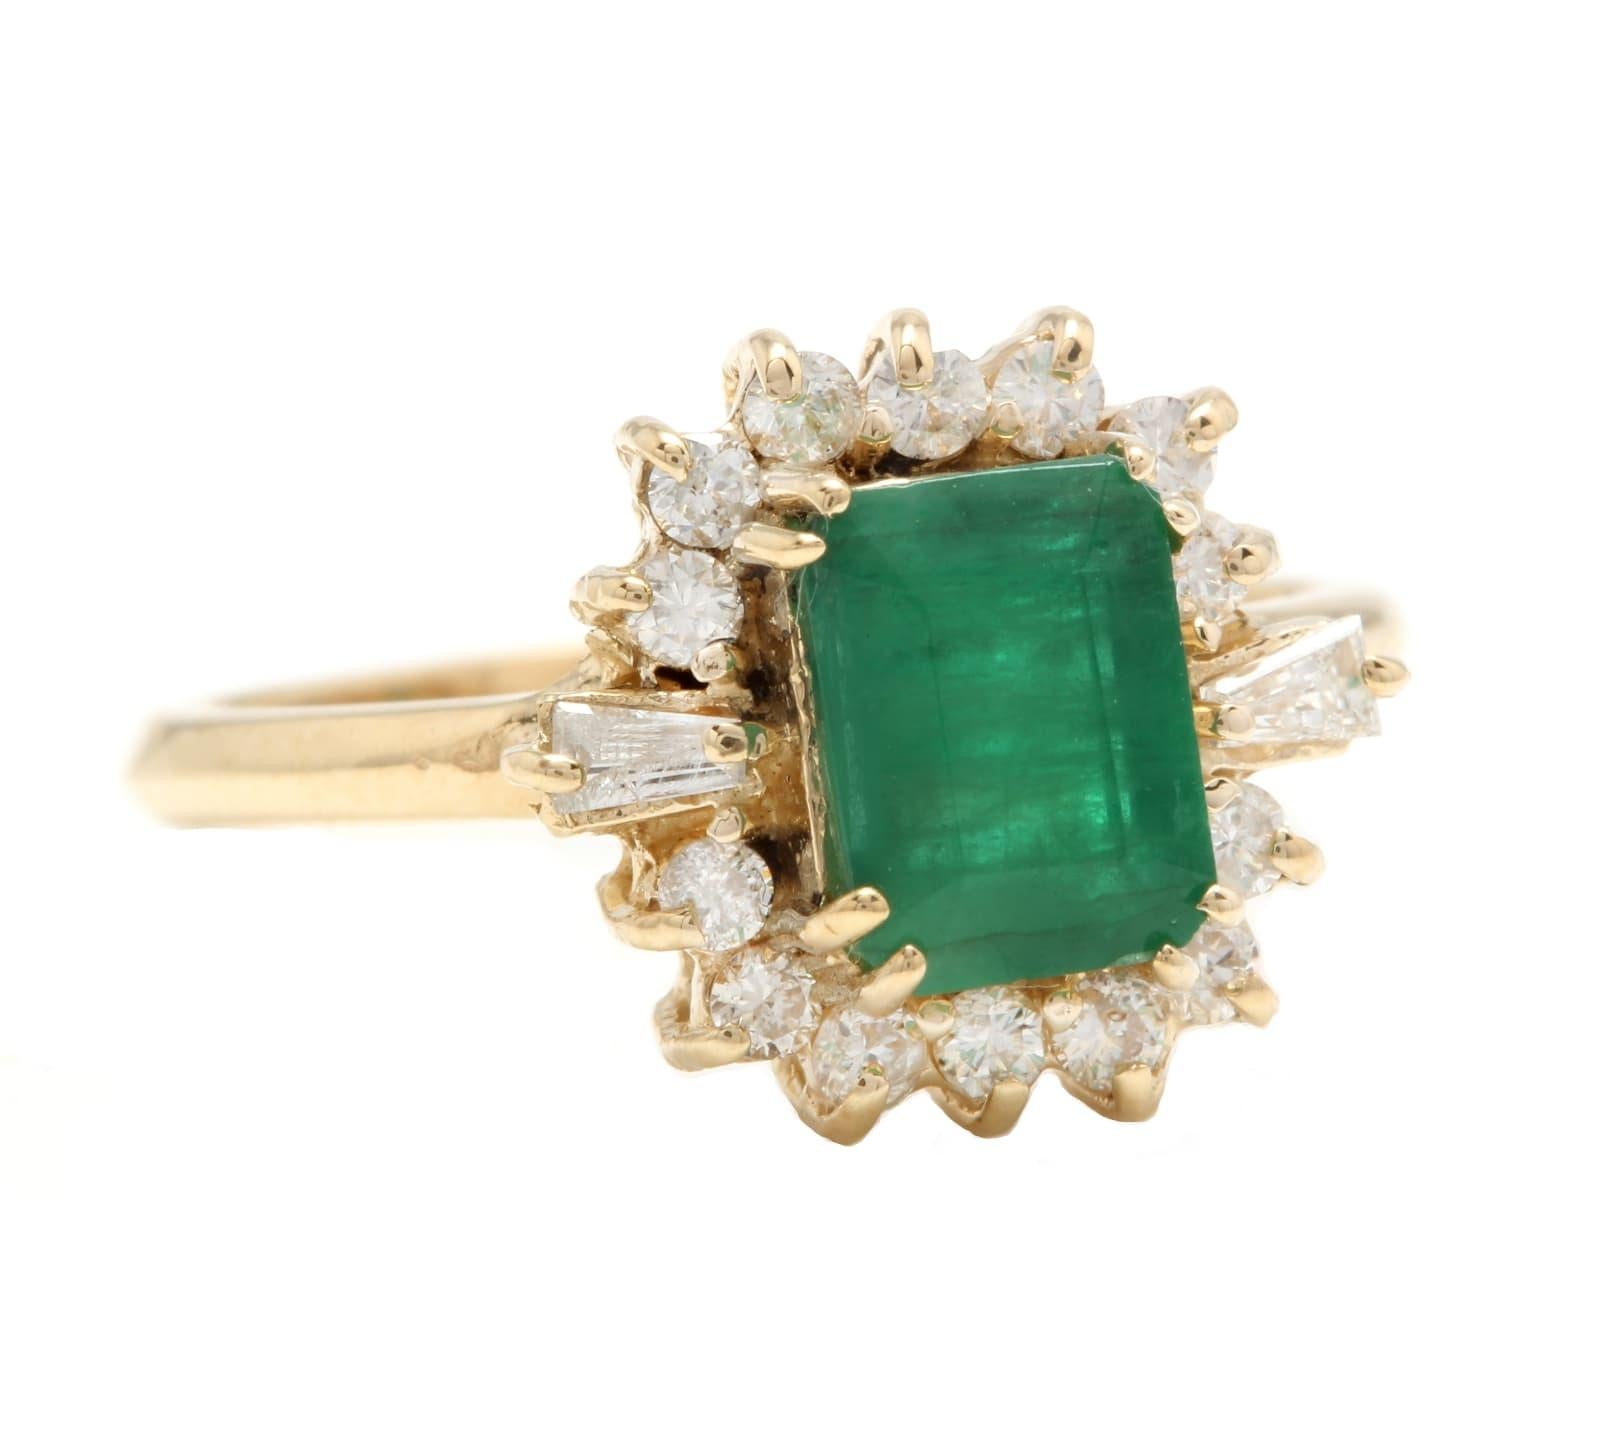 1.60 Carats Natural Emerald and Diamond 14K Solid Yellow Gold Ring

Total Natural Green Emerald Weight is: Approx. 1.30 Carats

Emerald Measures: Approx. 7.00 x 5.00mm

Natural Round Diamonds Weight: Approx. 0.30 Carats (color G-H / Clarity